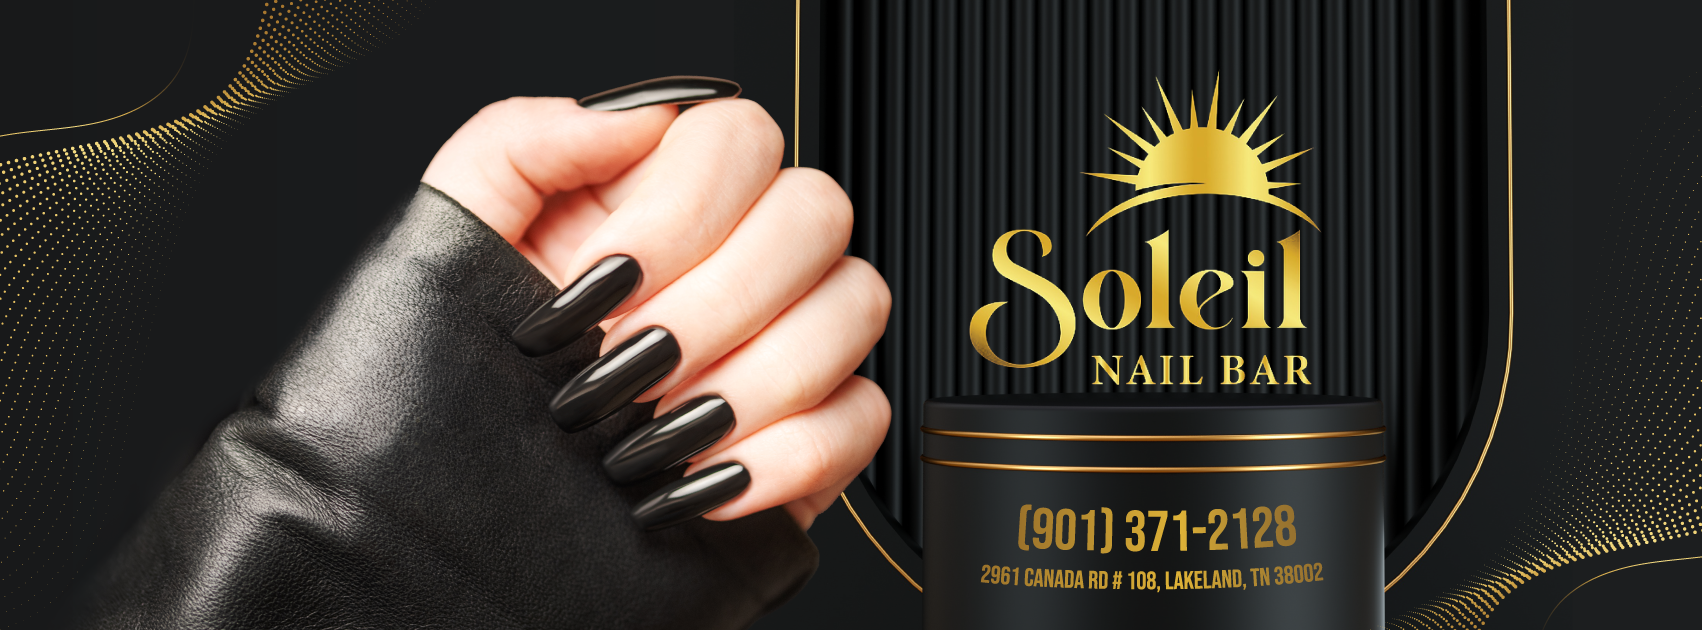 Safety Nails Spa 2961 Canada Rd # 108, Lakeland Tennessee 38002